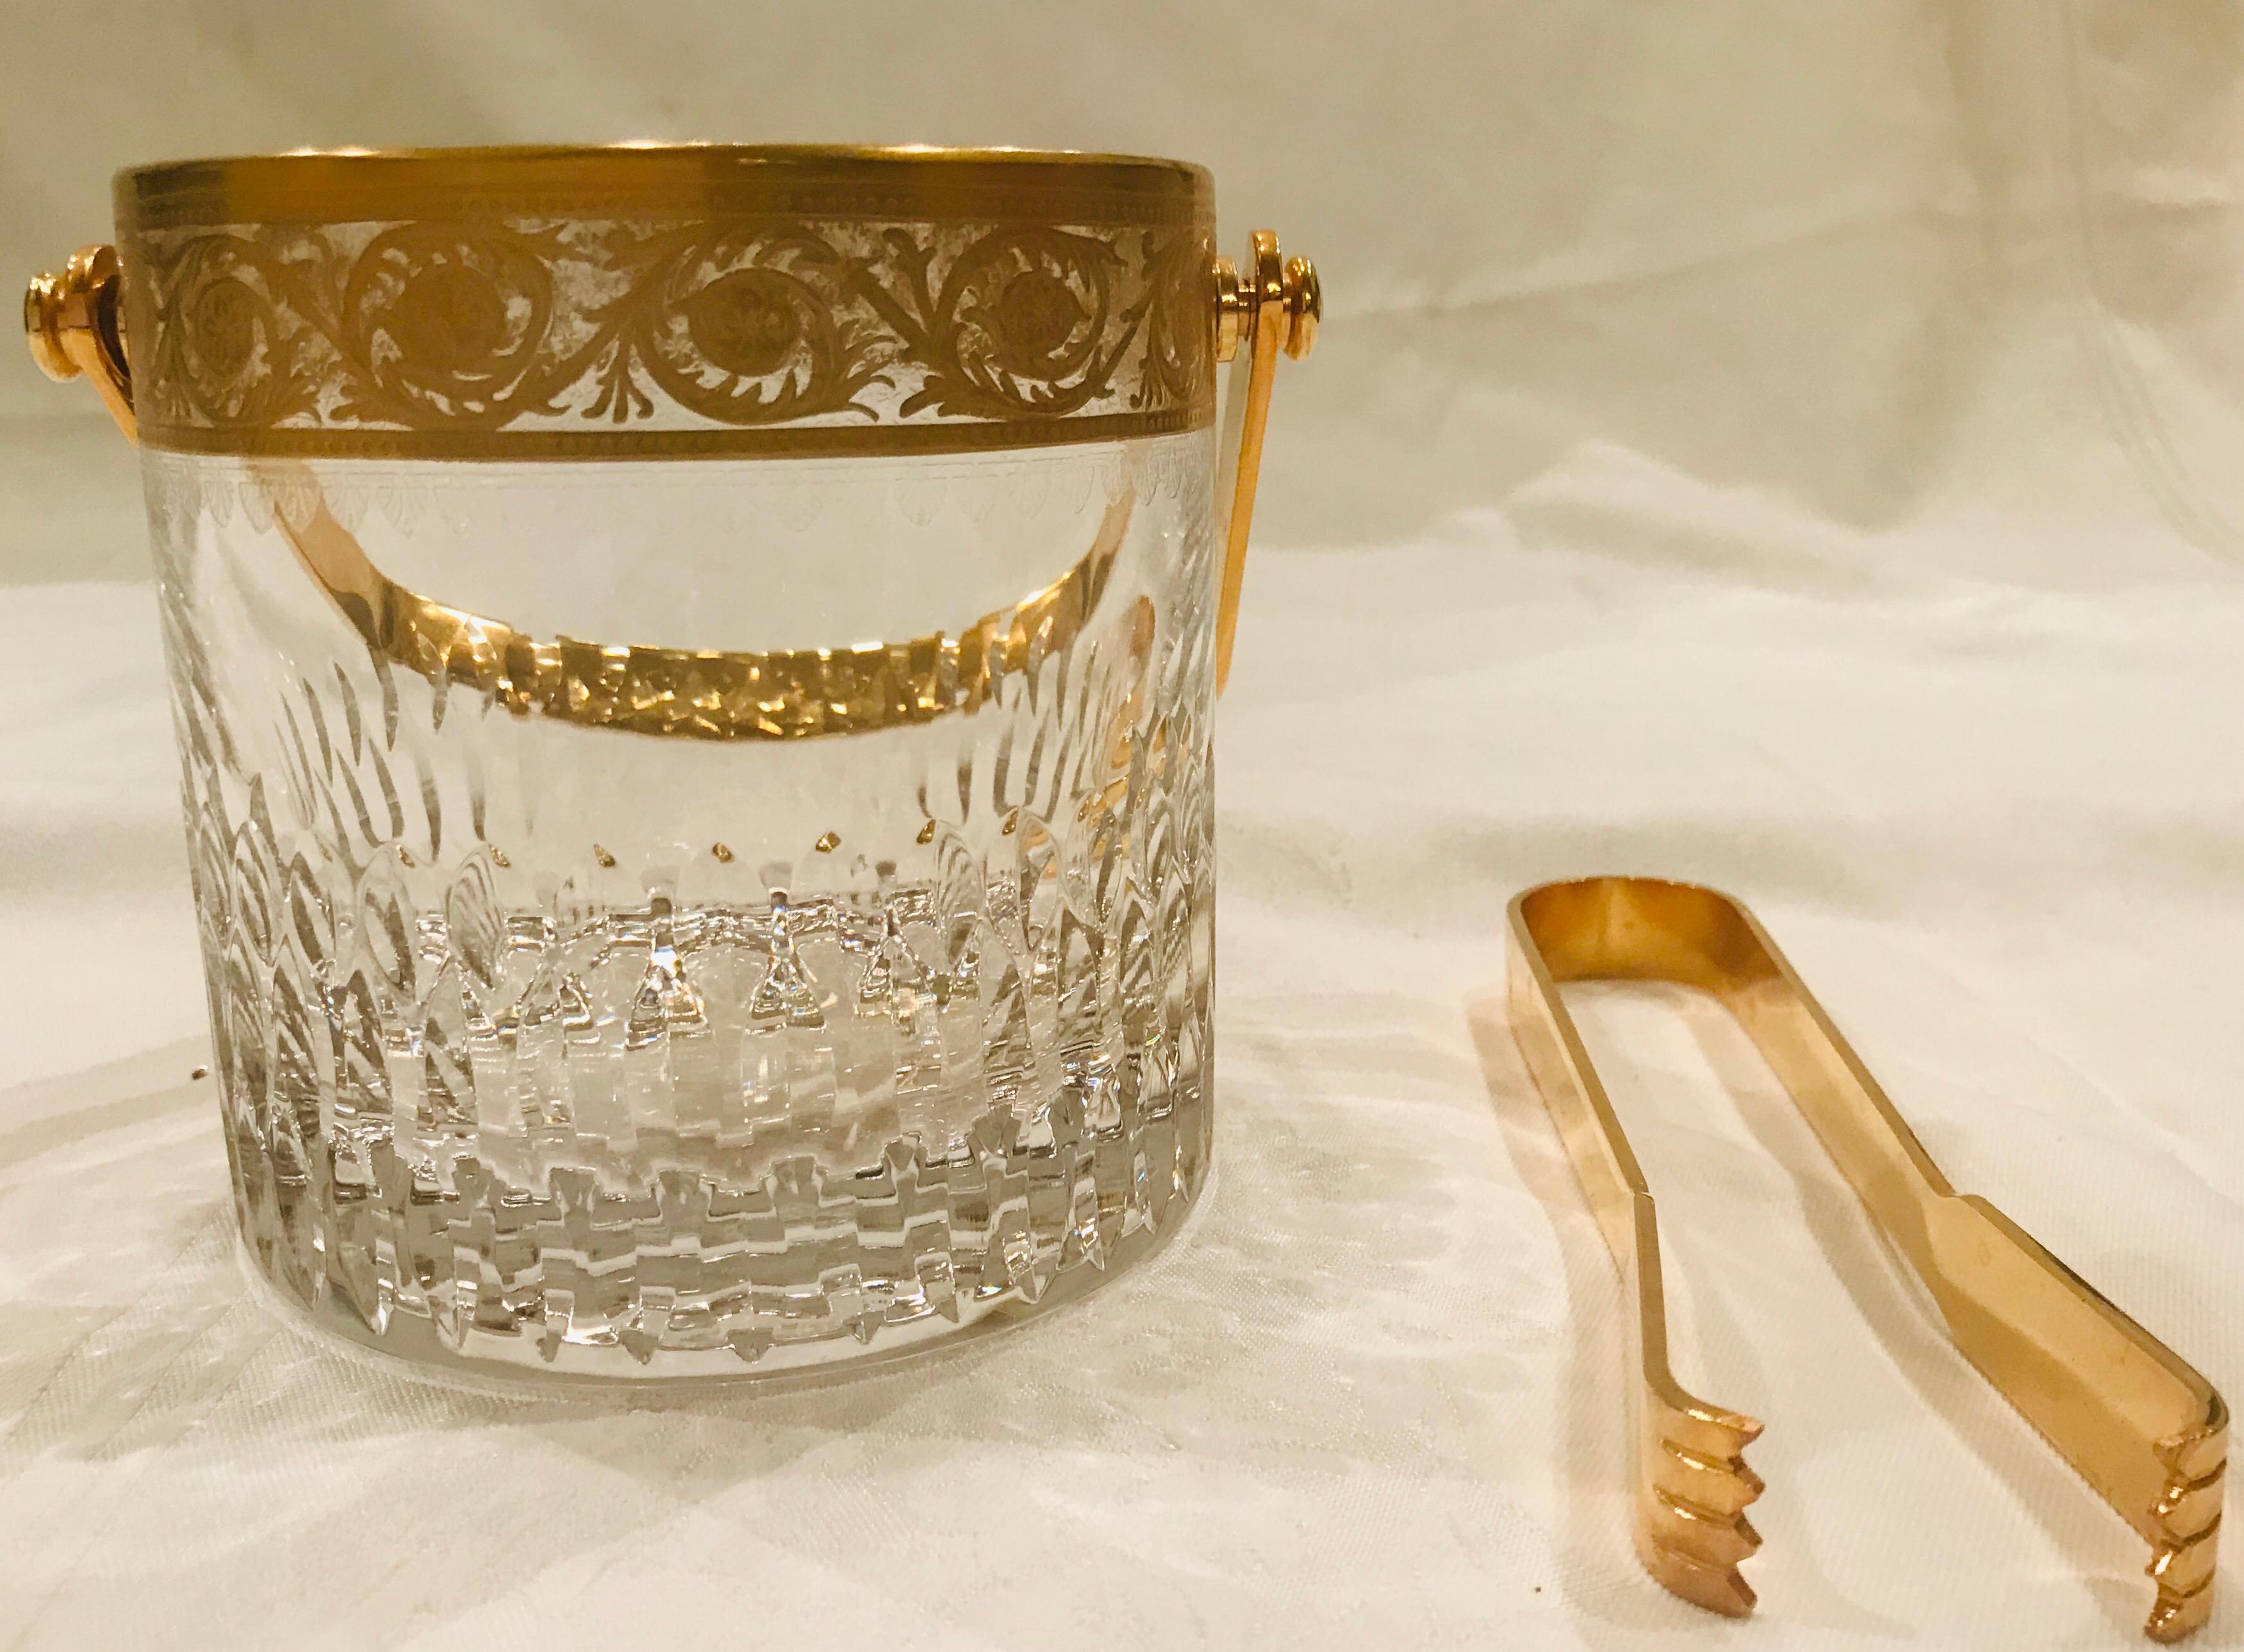 Saint Louis gold Thistle has been in continuous production since 1908 and has graced many formal tables in Europe and the world. This heavy, highly detailed ice bucket is from production in the late 1980s.

This item was used for display only in a